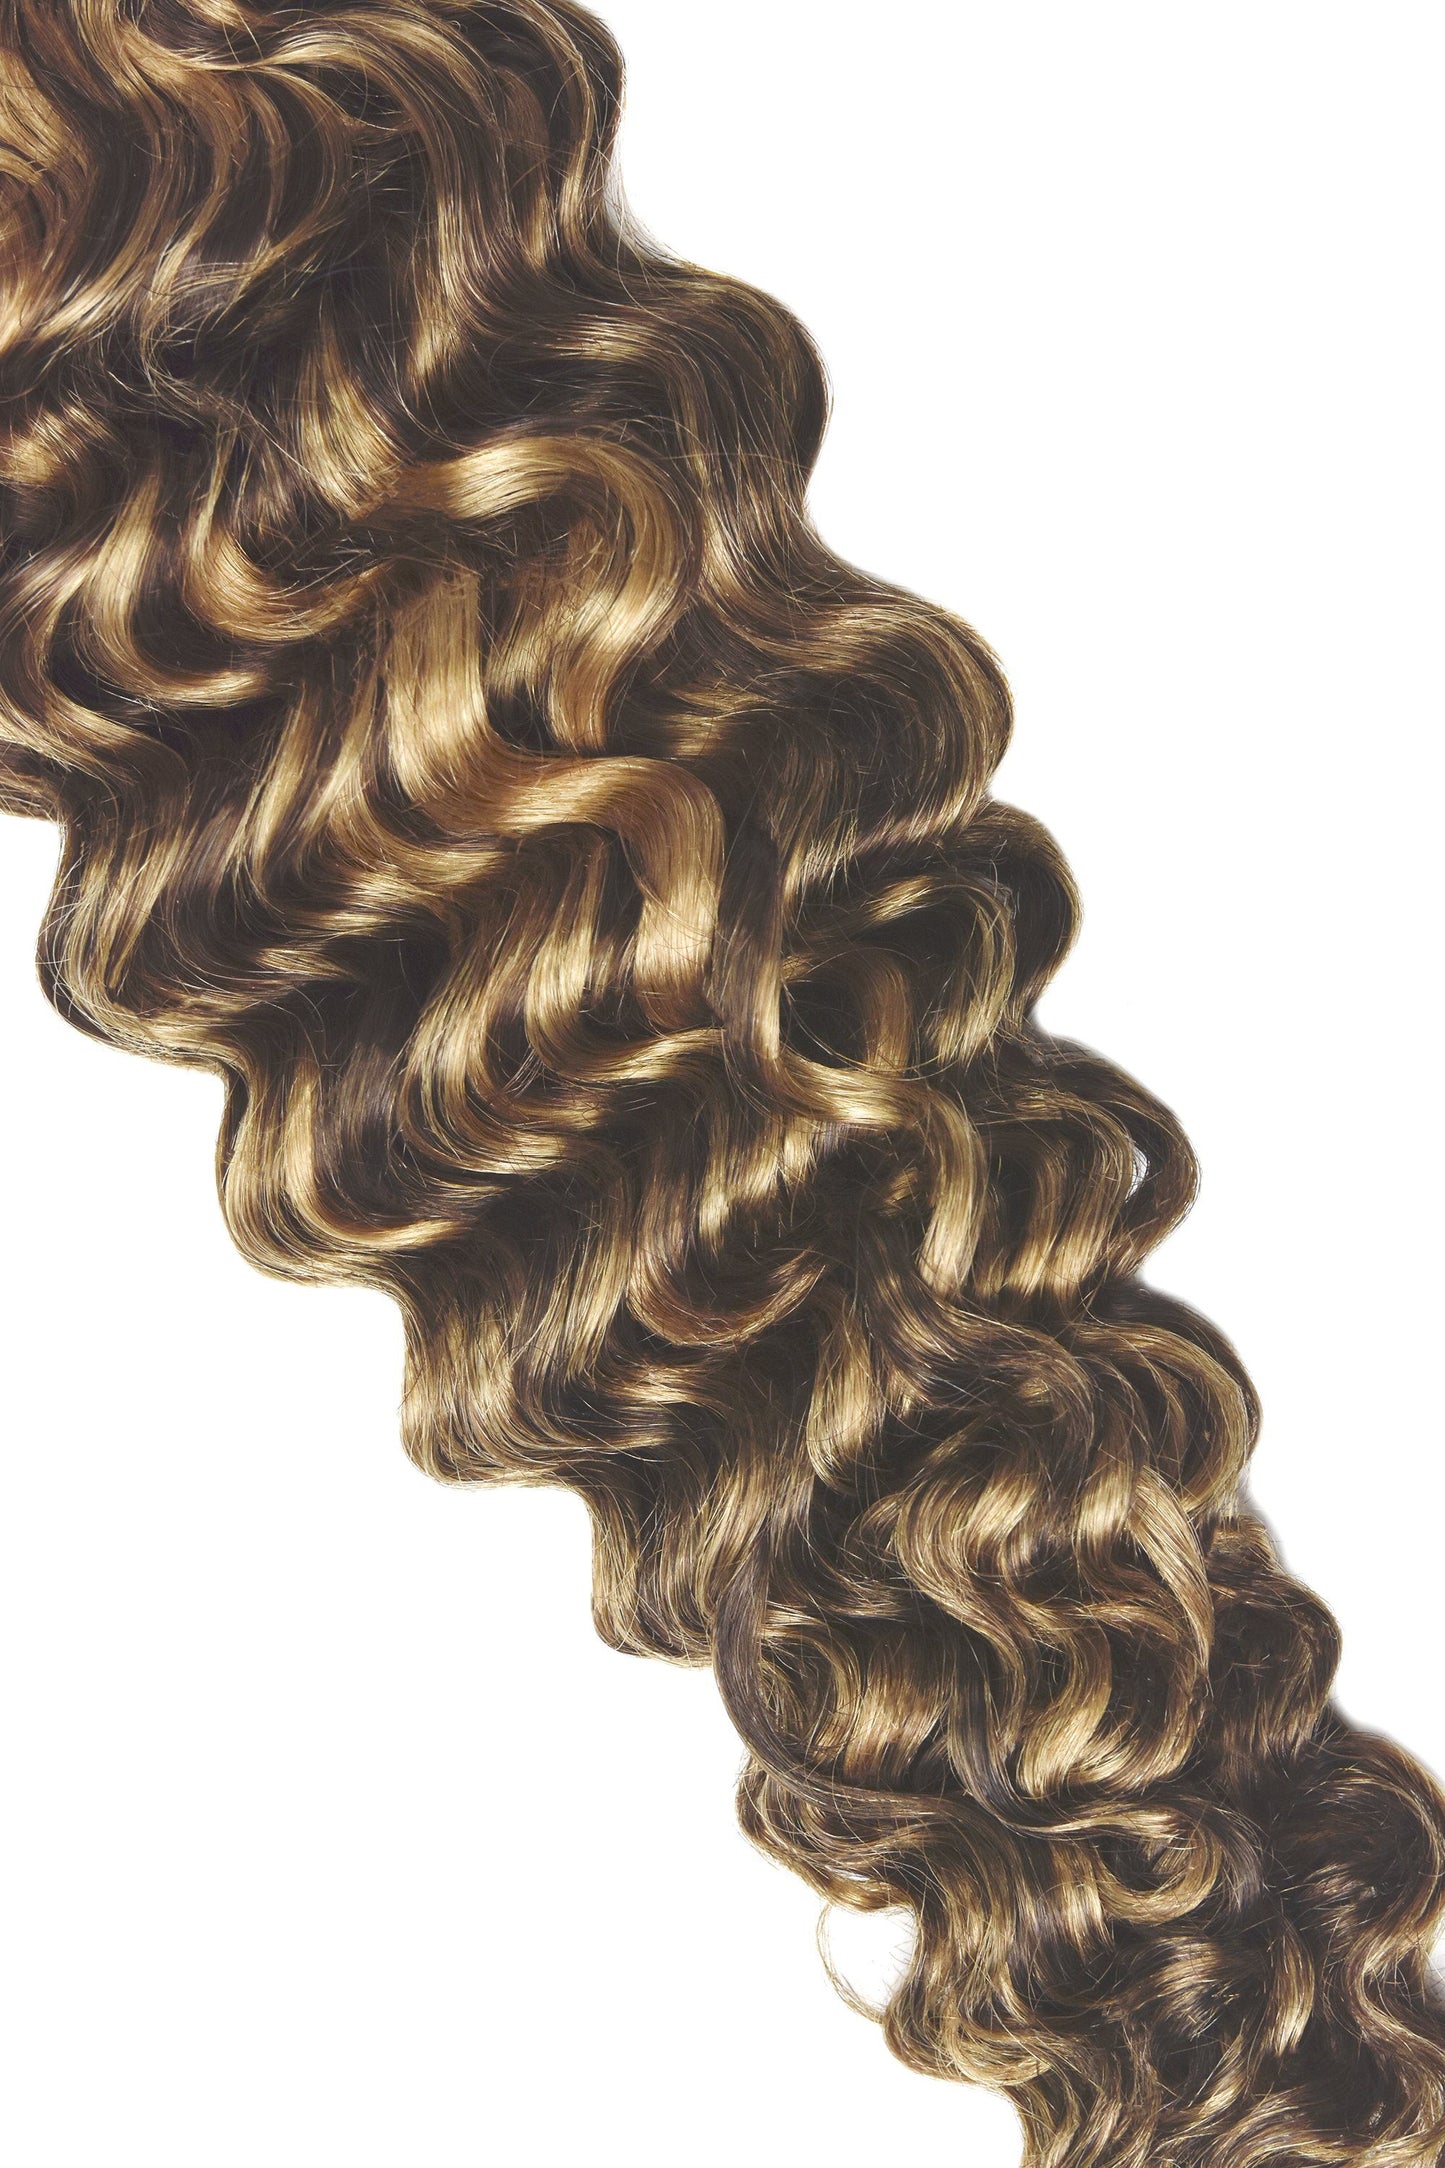 Curly Full Head Remy Clip in Human Hair Extensions - Medium Brown/Strawberry Blonde Mix (#4/27) Curly Clip In Hair Extensions cliphair 